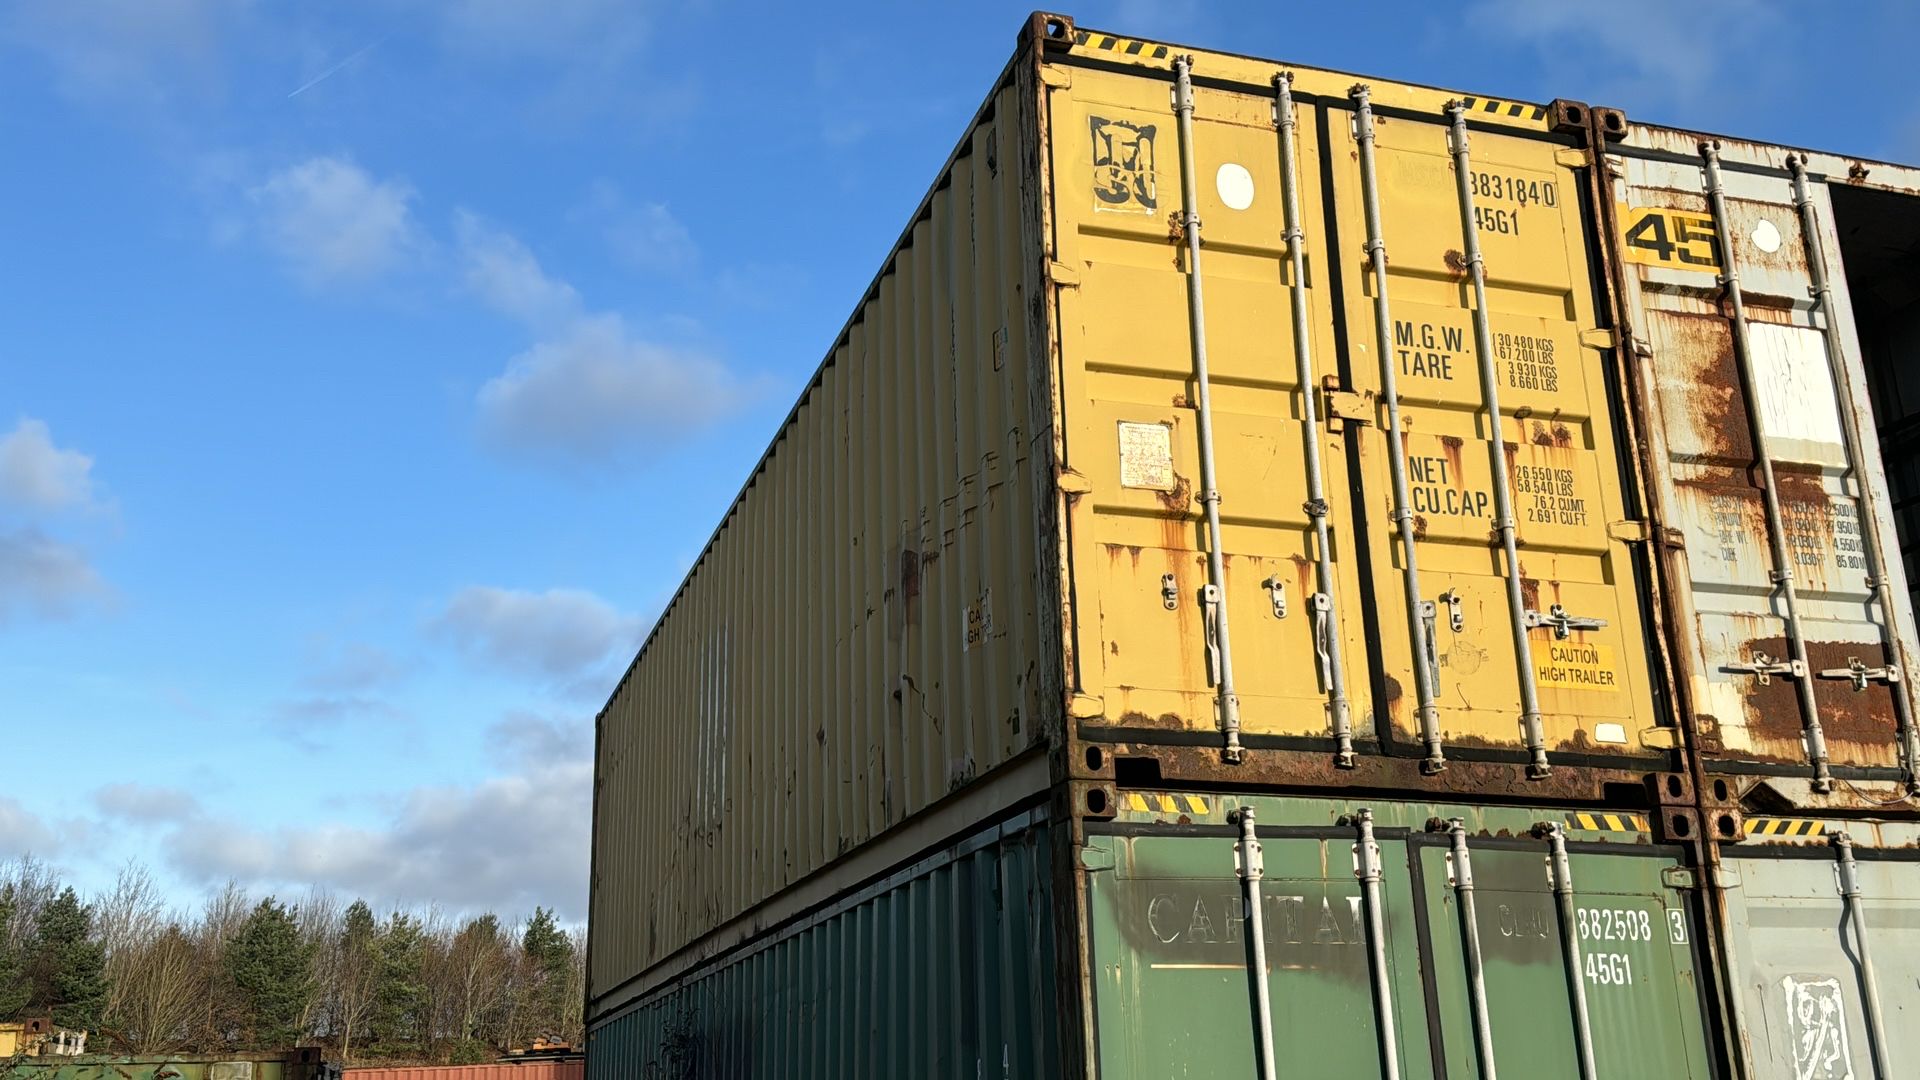 Shipping container, 48 (MSCU883184045G1) - Image 2 of 3